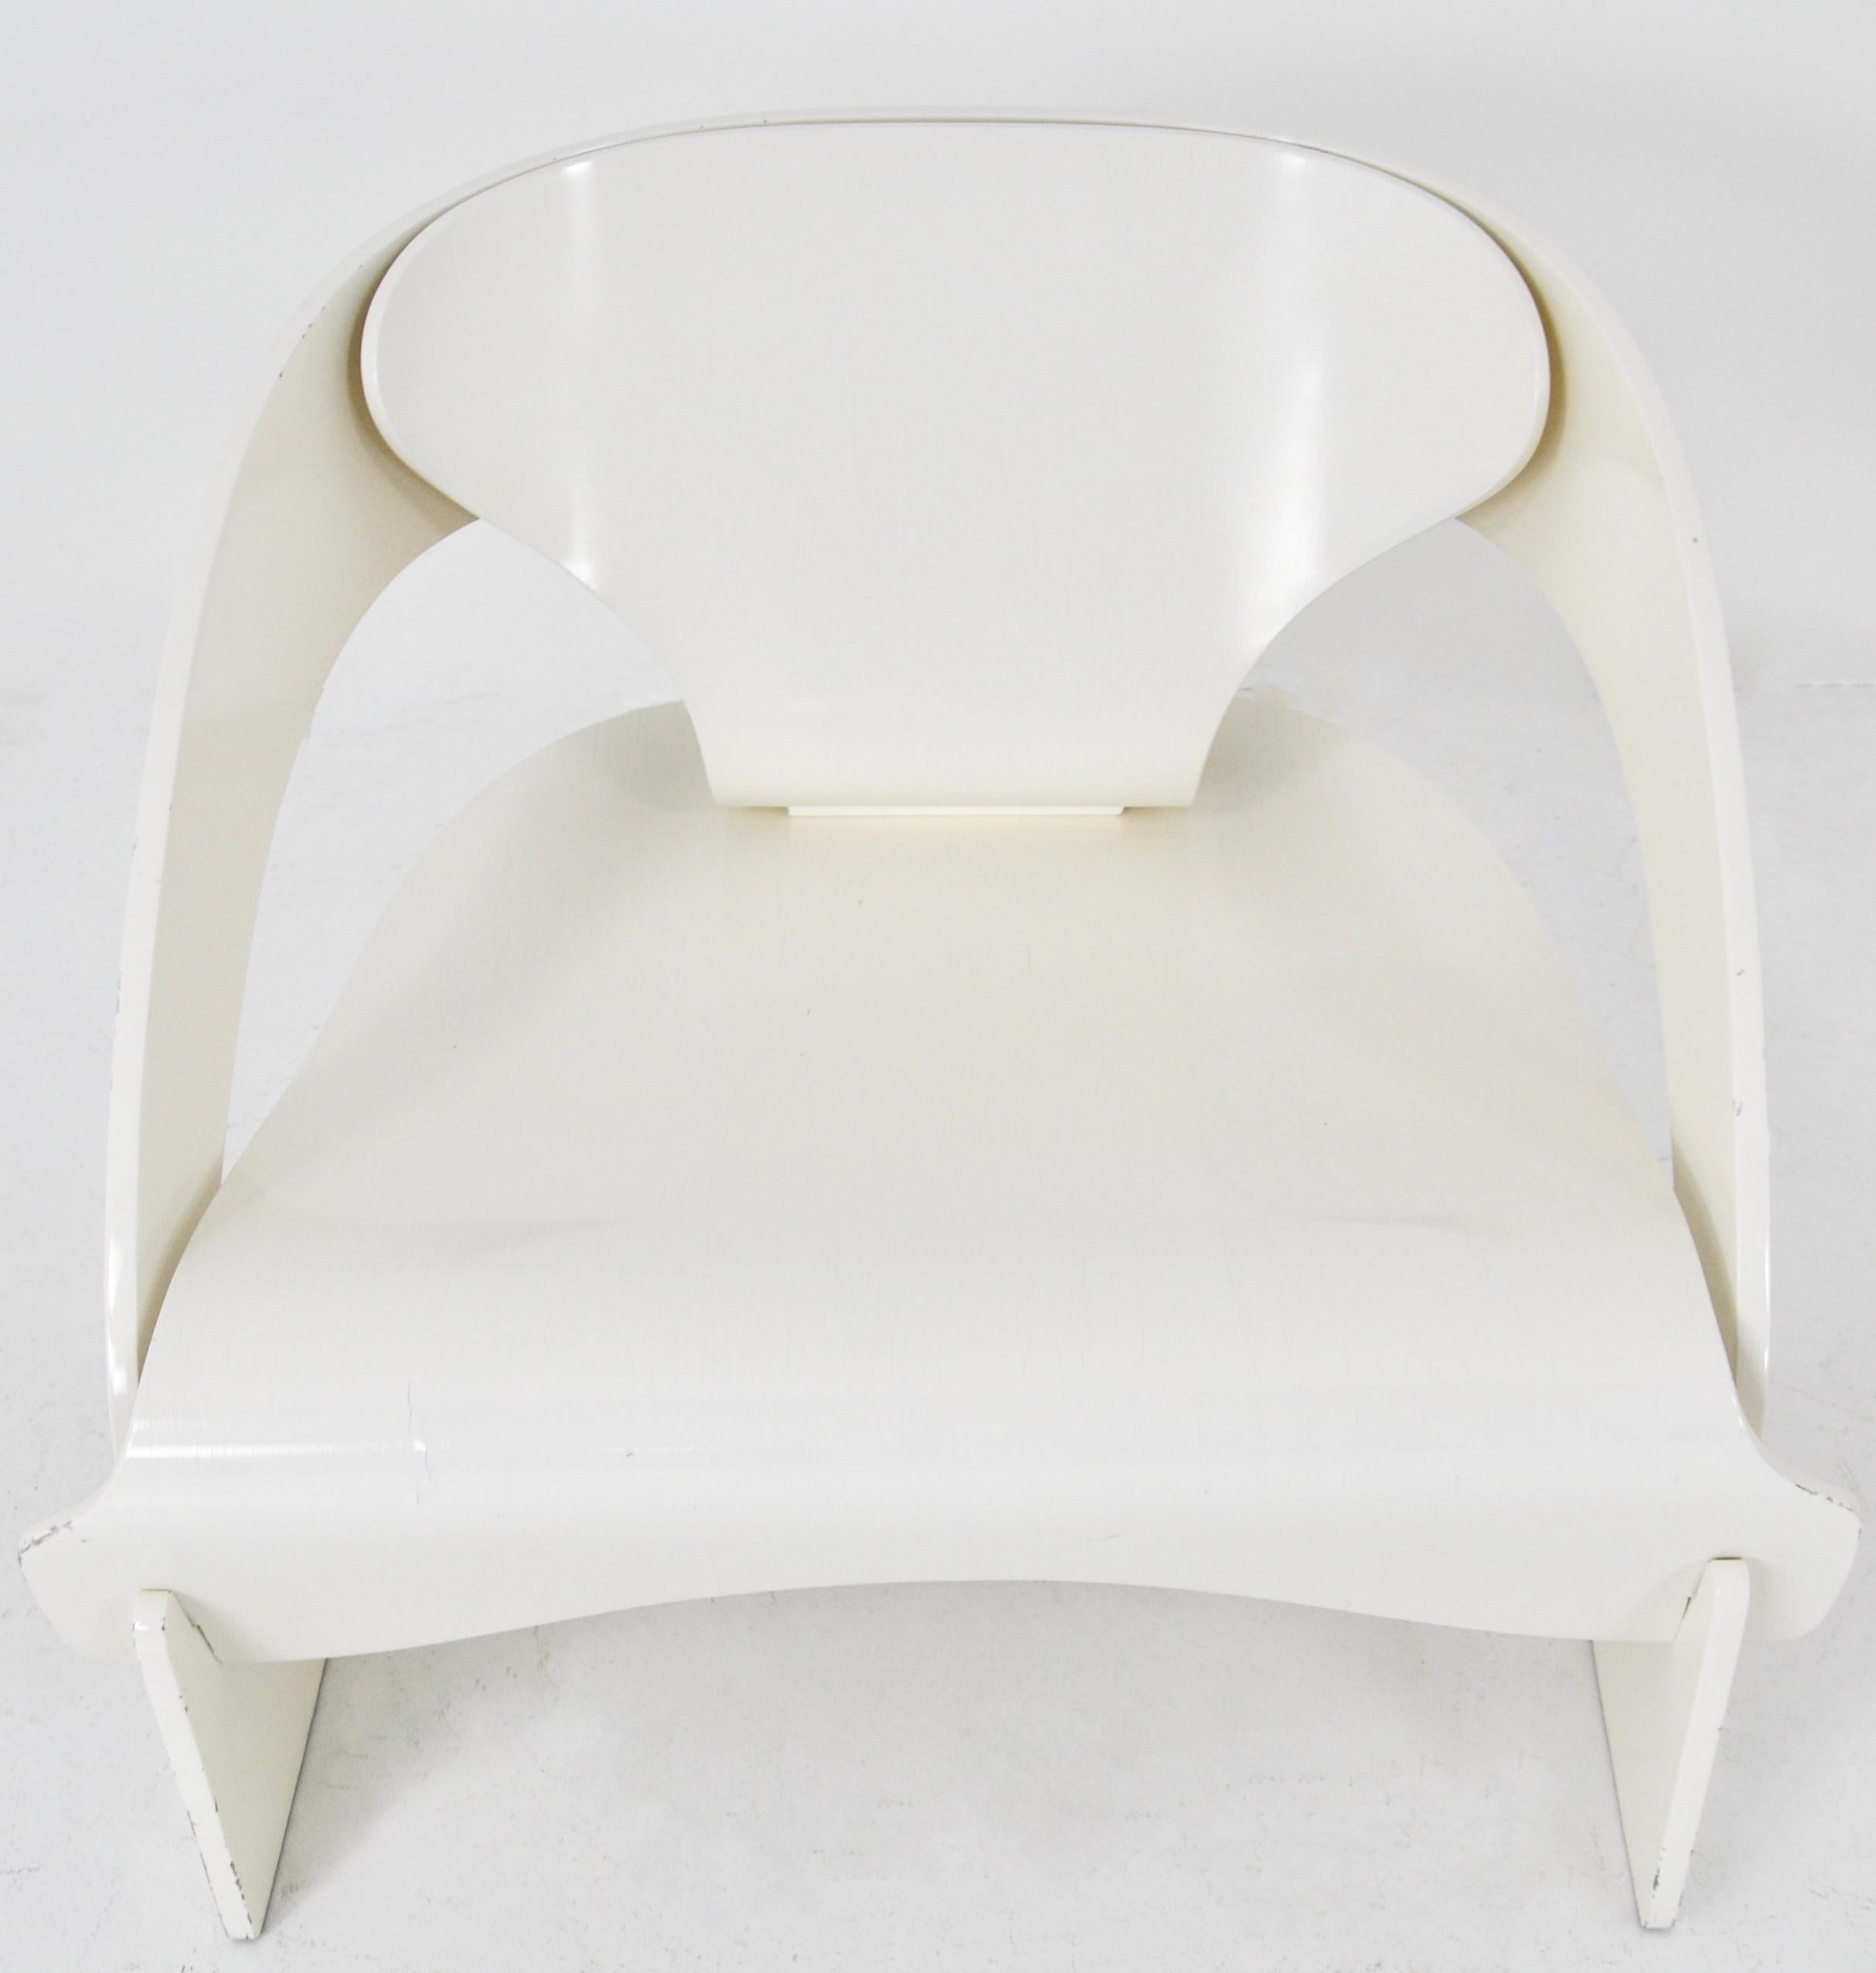 Model 4801 Armchairs by Joe Colombo for Kartell, 1960s, set of 2 For Sale 2